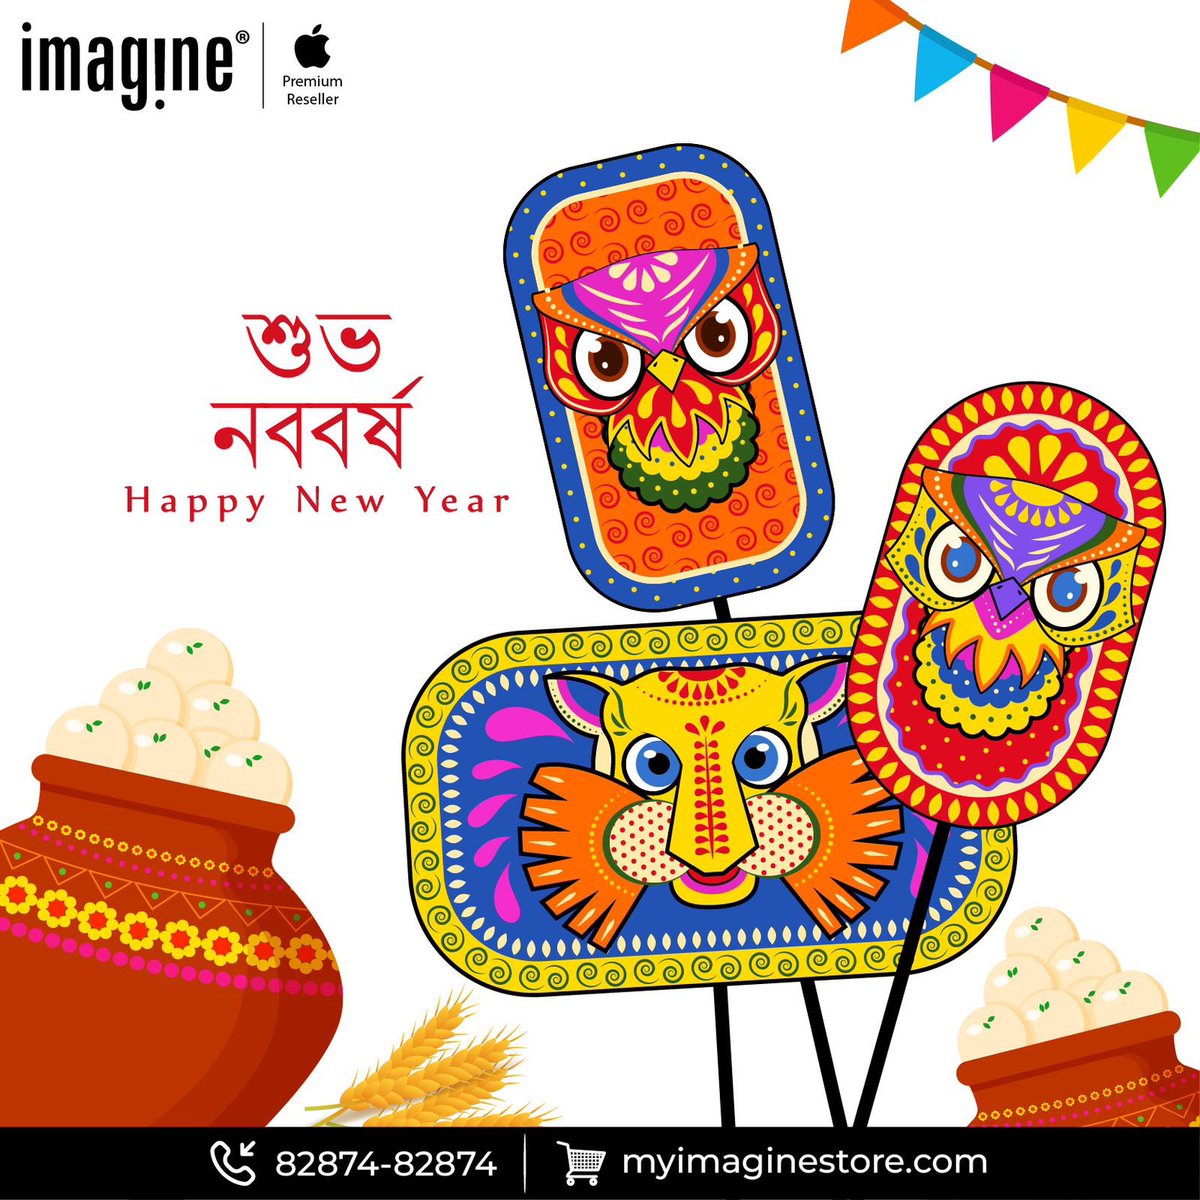 Happy Bengali New Year! May this Poila Baisakh bring you love, luck, and laughter. #Tresor #Imagine #Apple #PoilaBaisakh #Wishes #Prosperity